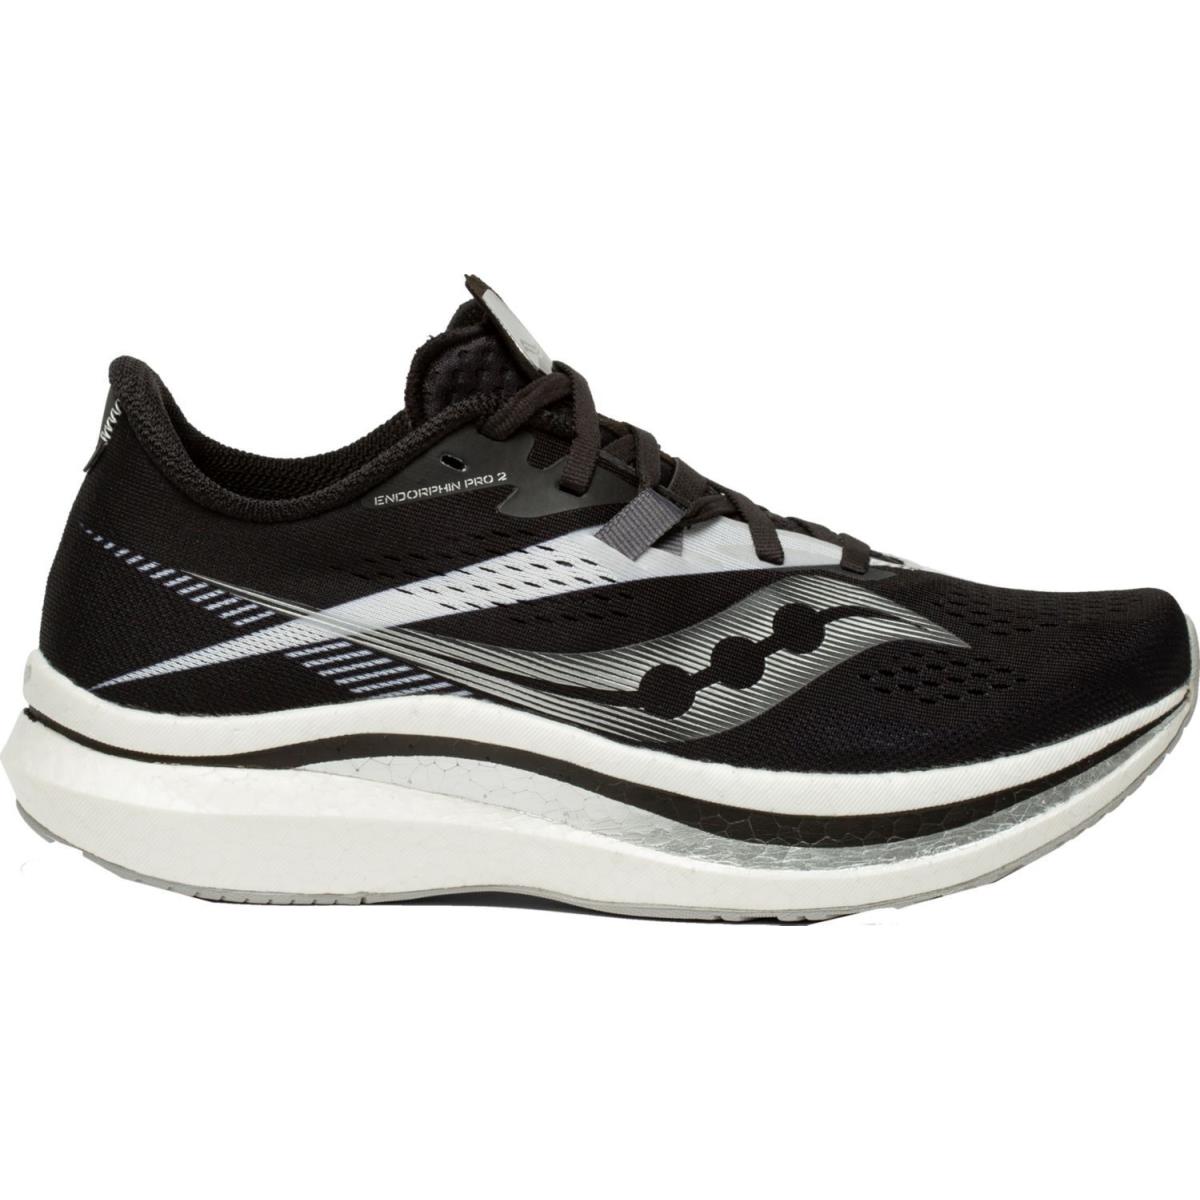 Womens Saucony Endorphin Pro 2 Running Shoes Black White Grey Silver S10687 10 - Black